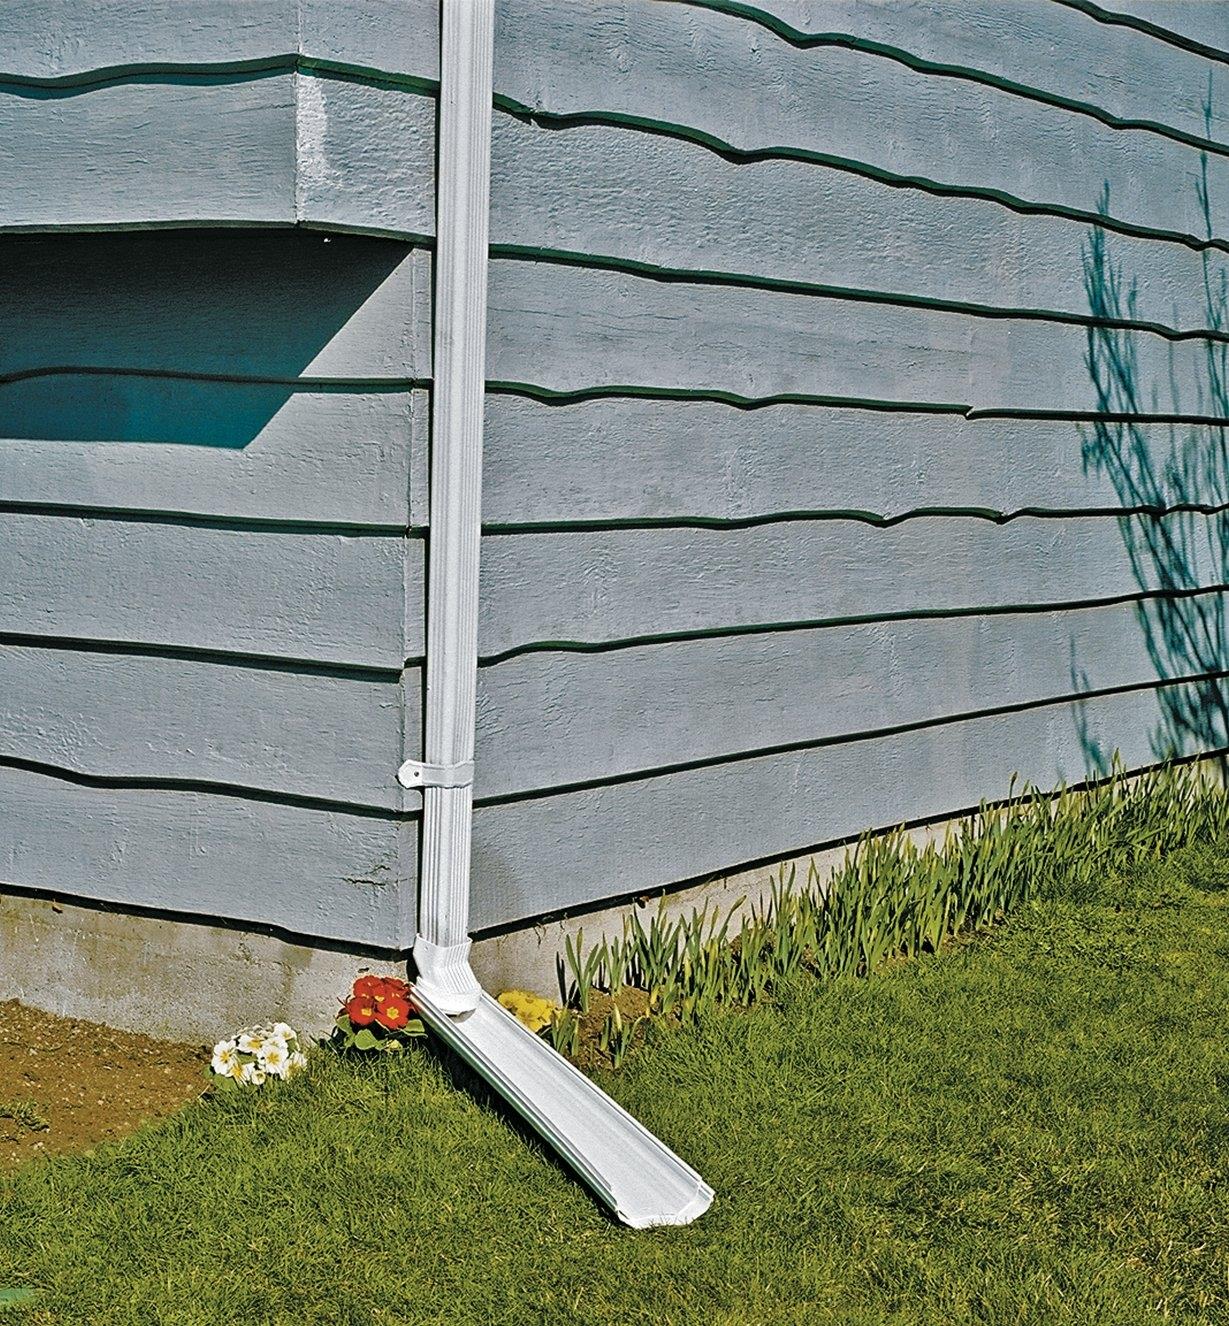 A plastic downspout emptying off of a house and onto a grass lawn